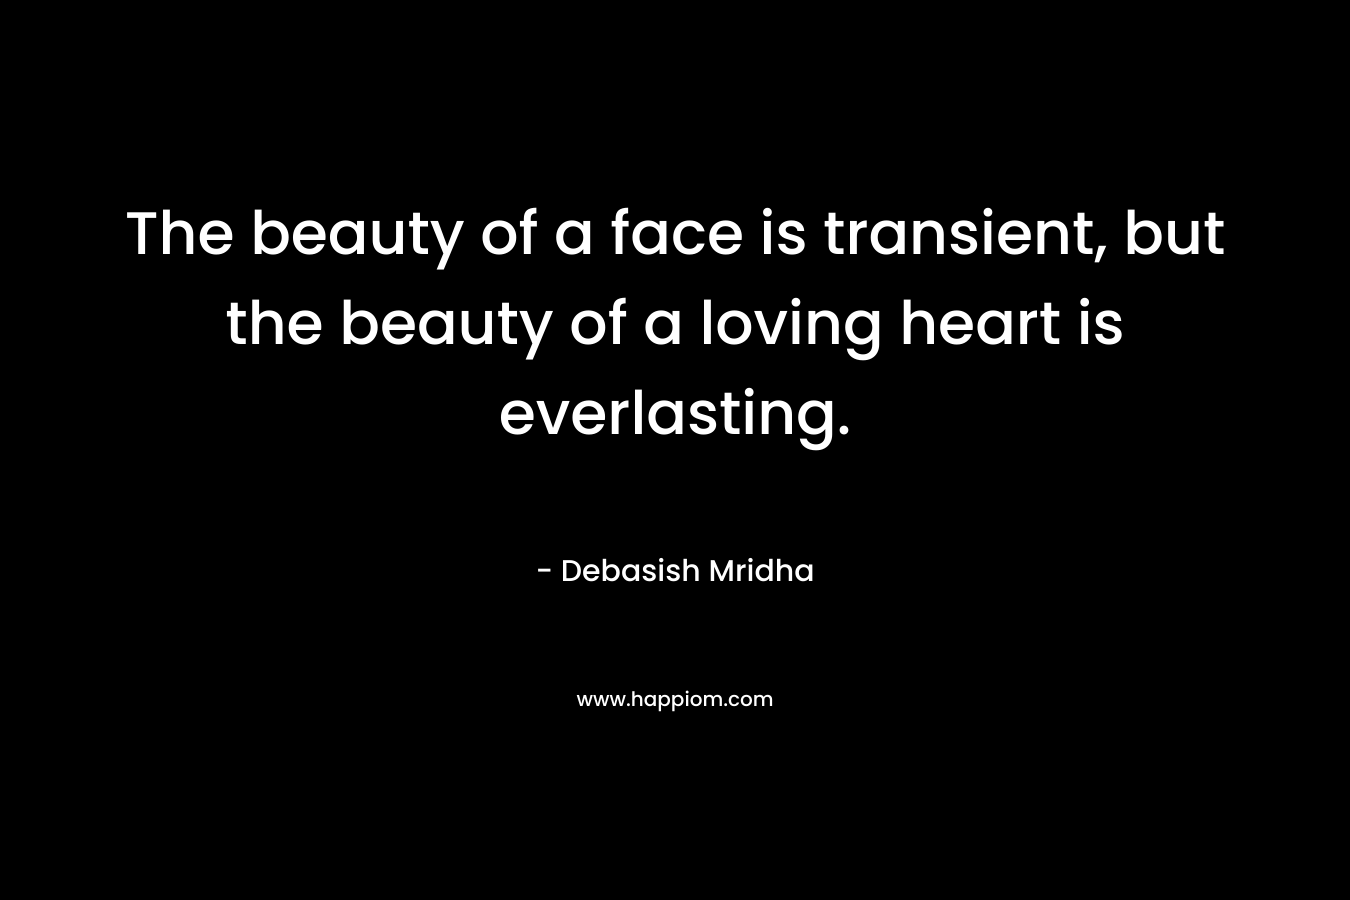 The beauty of a face is transient, but the beauty of a loving heart is everlasting.